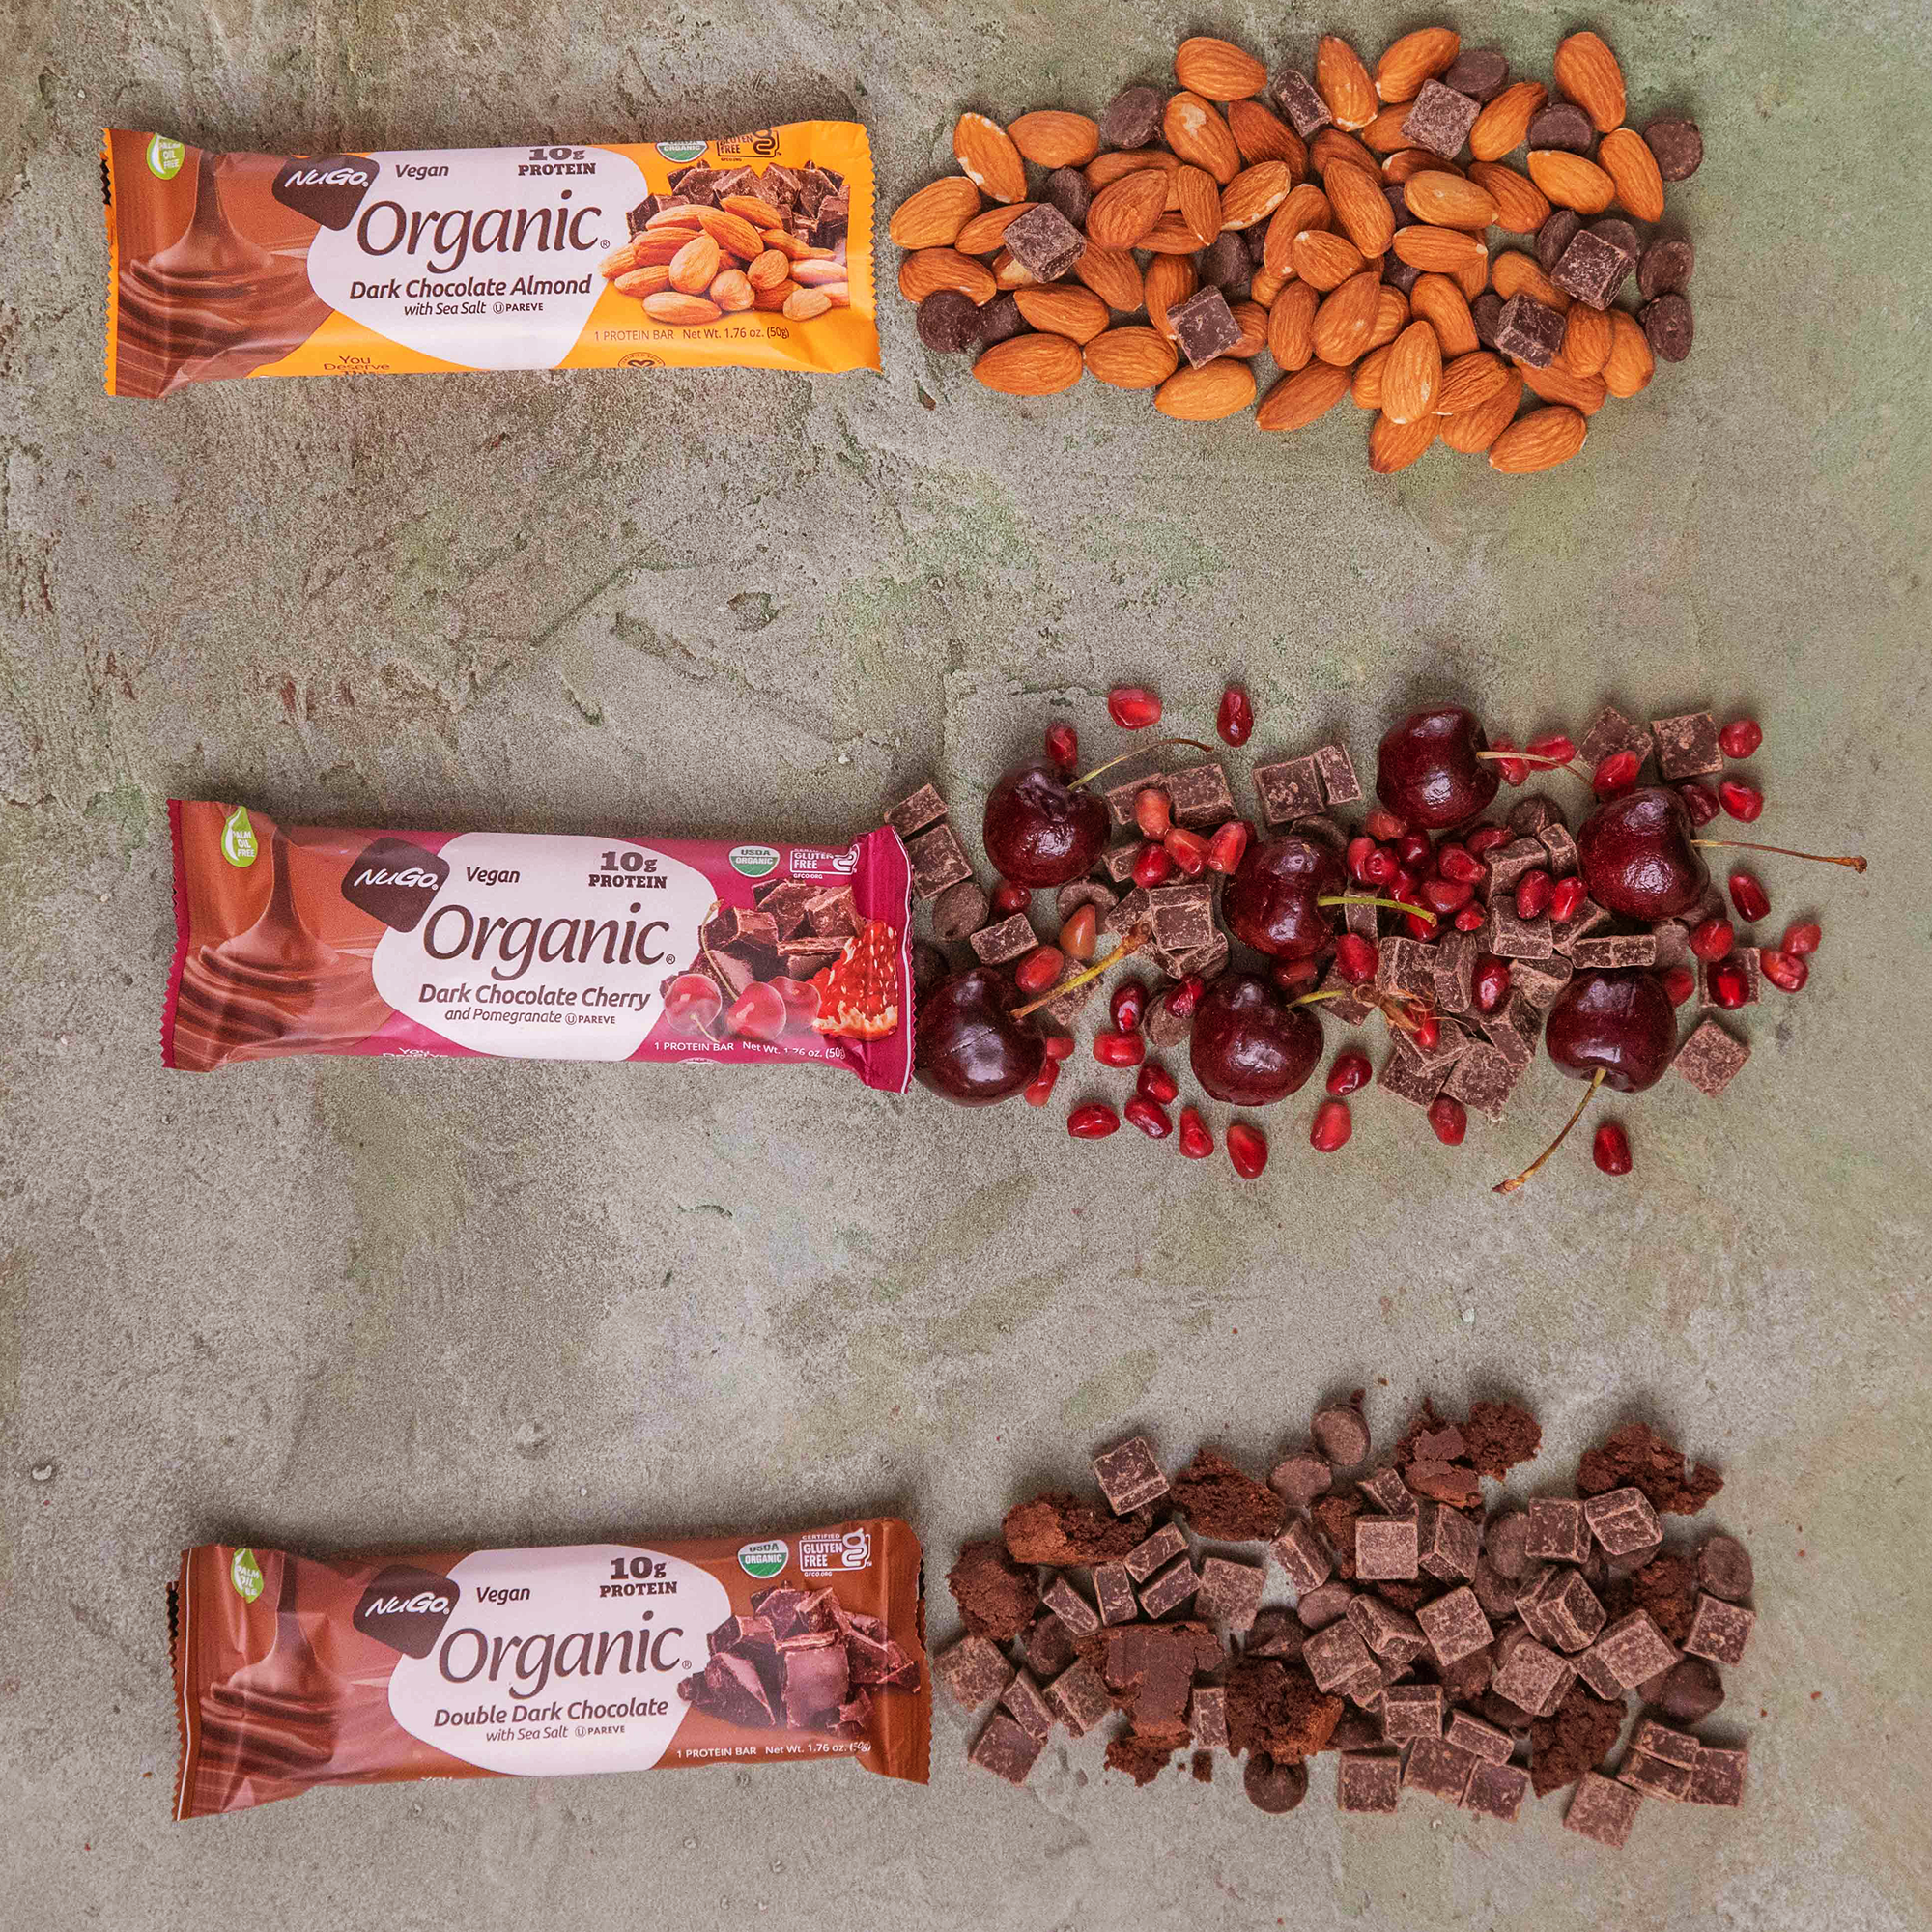 Three flavors of NuGo Organic with Ingredients to the right of each bar